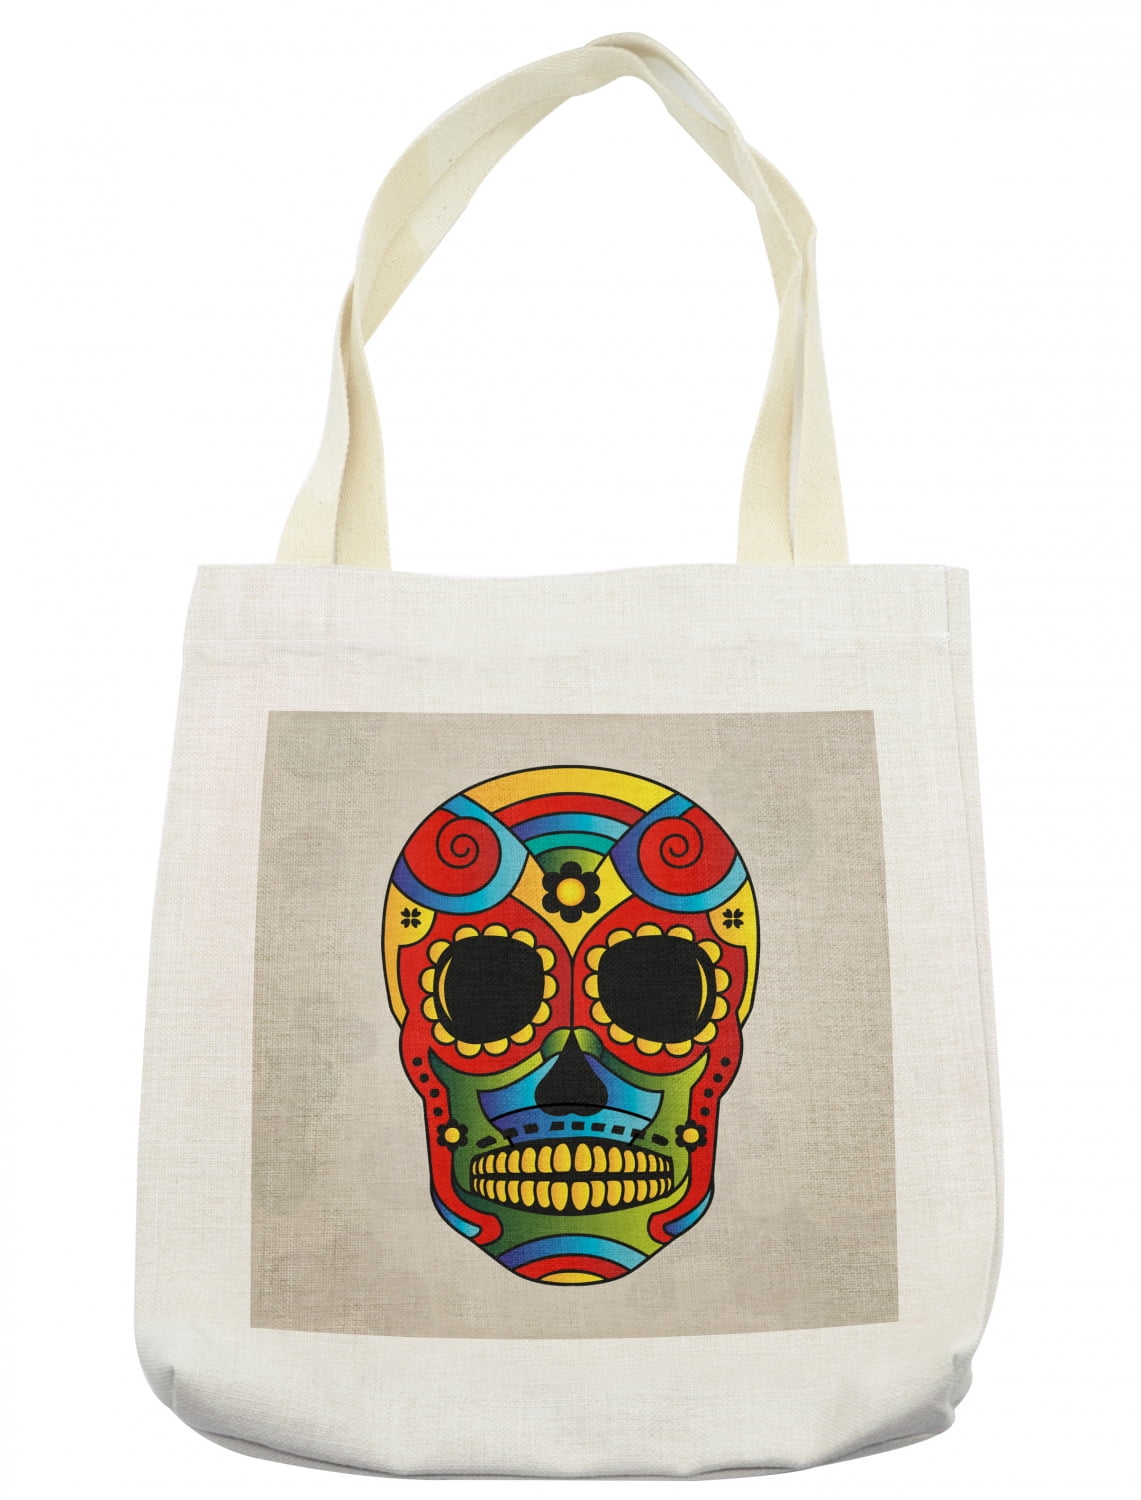 Six Lot Tote Shopping Bag Day of the Dead Reusable Grocery Market Mexico Sack 